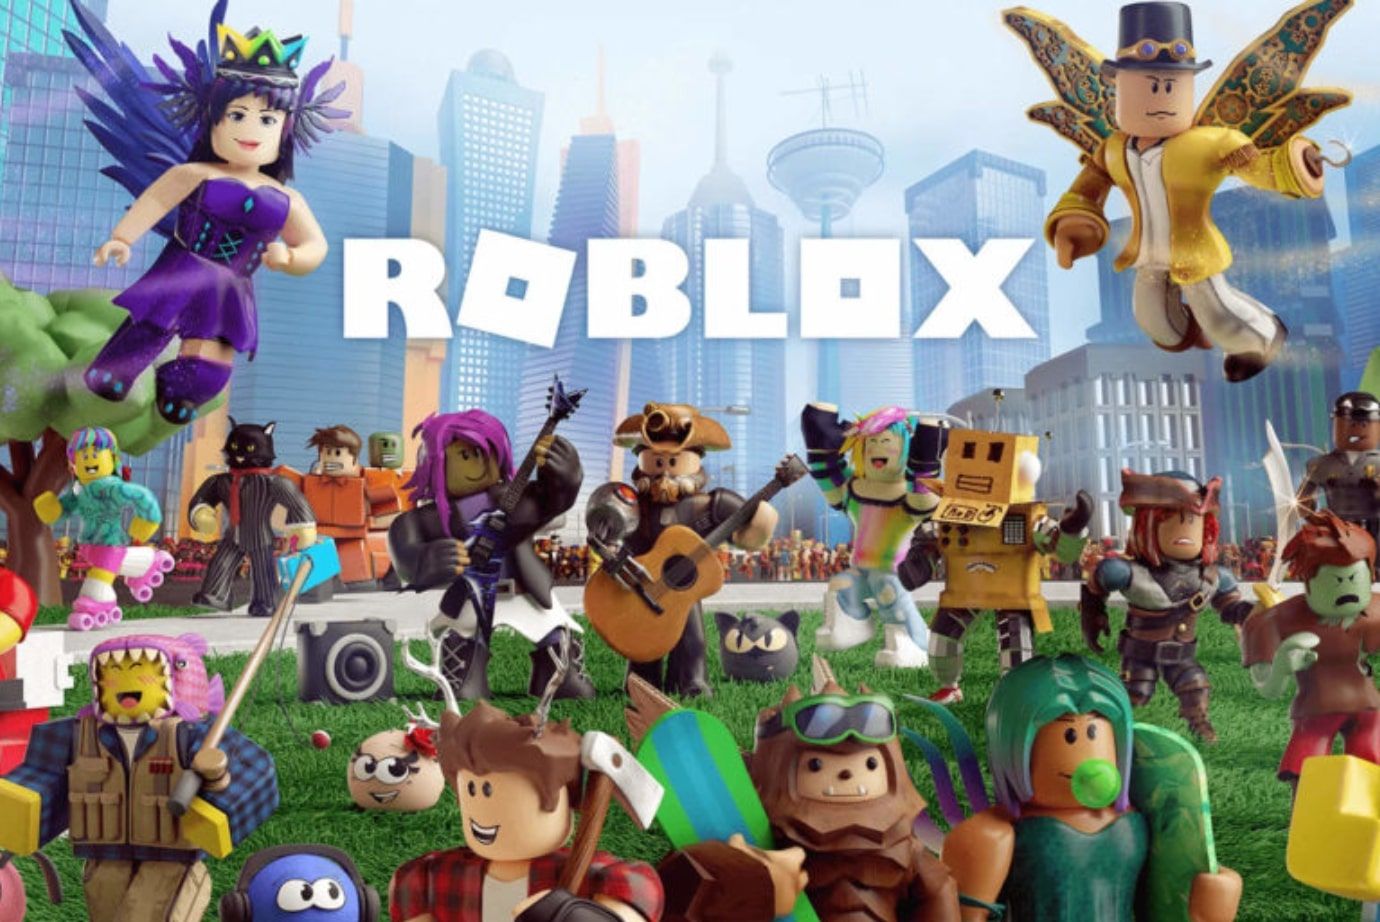 Roblox September 2020 Promo Codes New Cosmetics All Active Codes Backpacks Crystalline Companion More - roblox backpacking codes beta